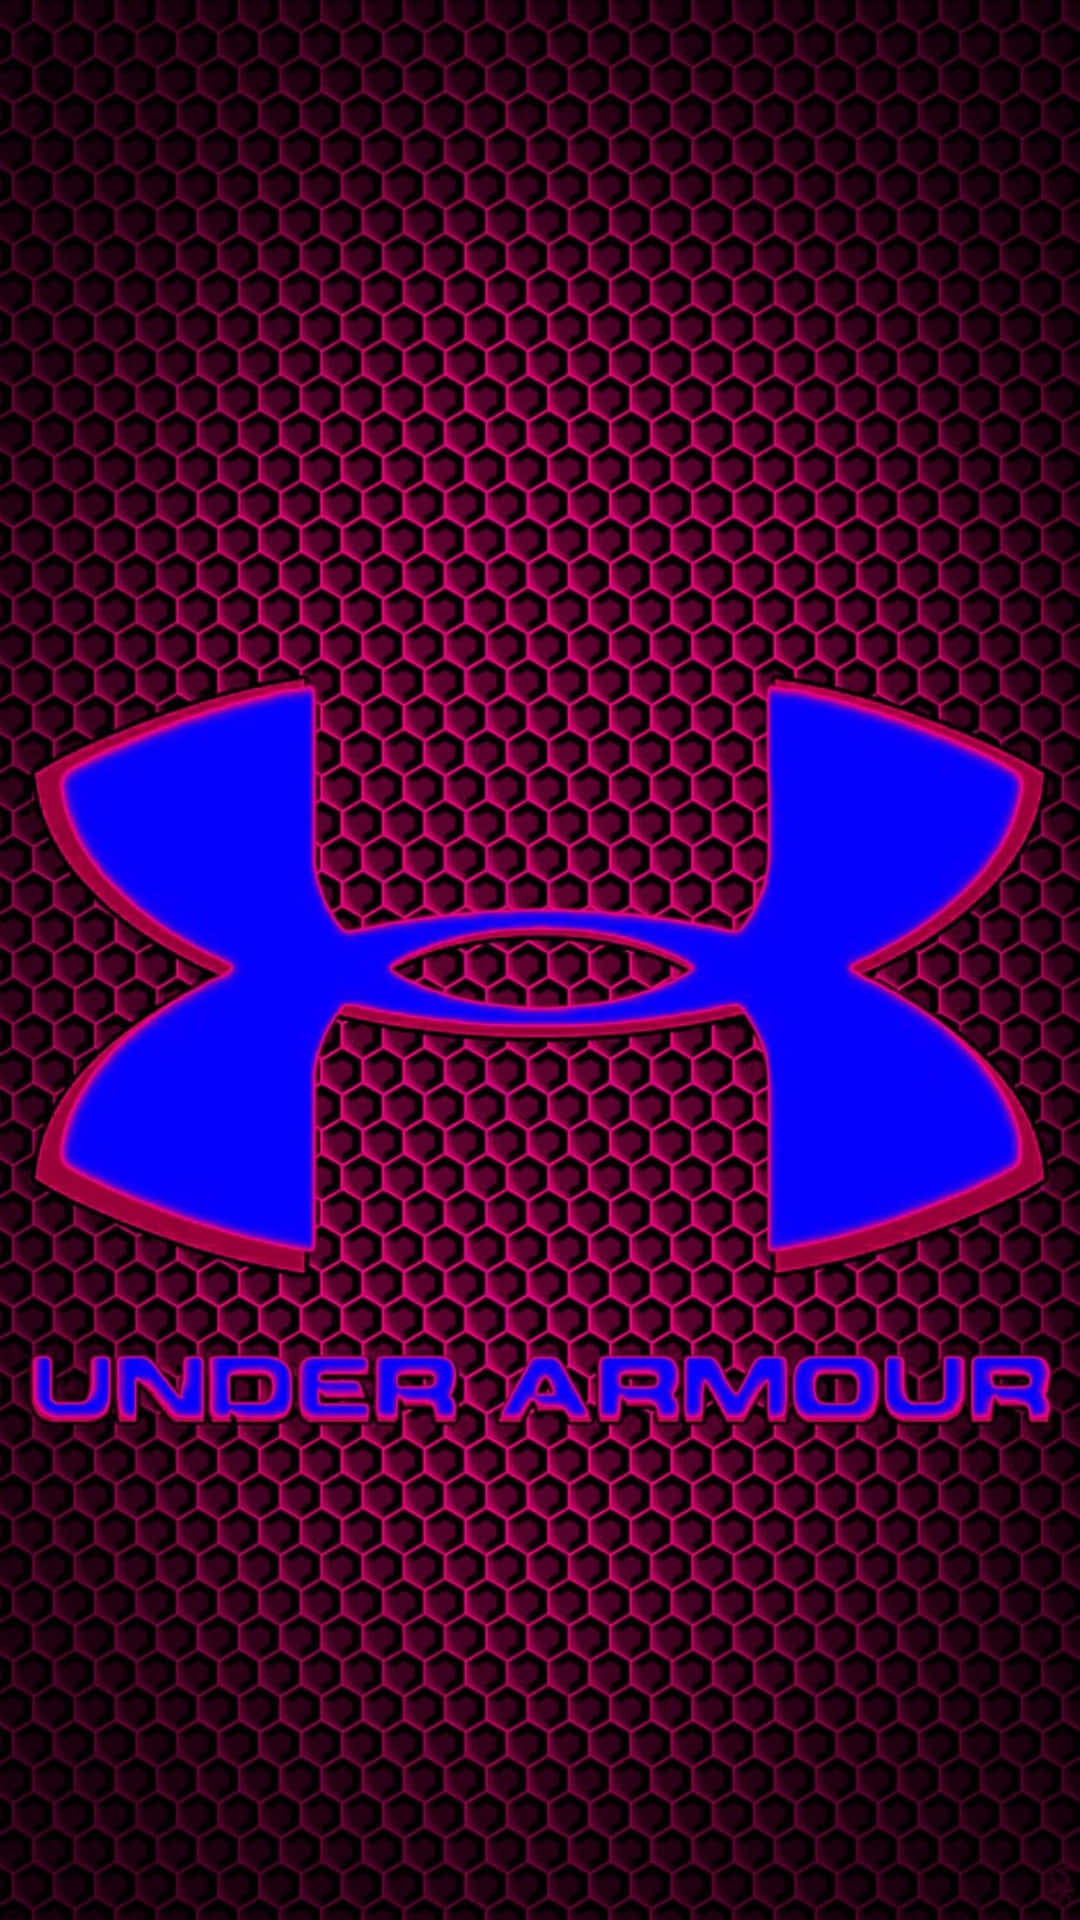 Under Armour Logo On A Black Background